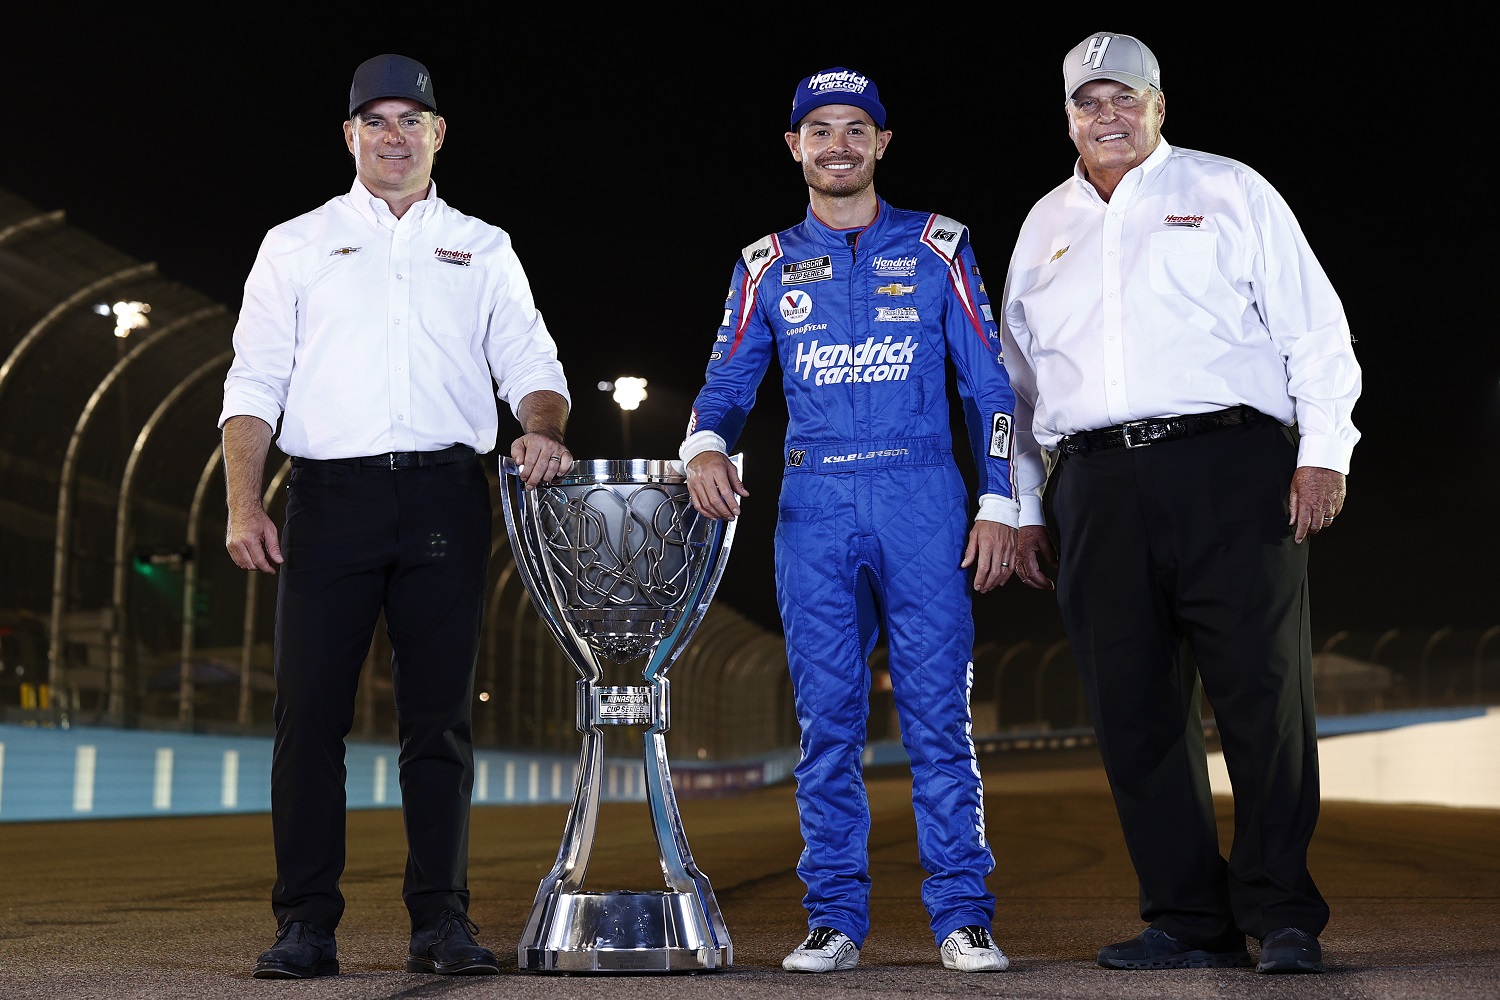 Kyle Larson, driver of the No. 5 Chevy, poses with Jeff Gordon and Rick Hendrick after winning the NASCAR Cup Series championship.